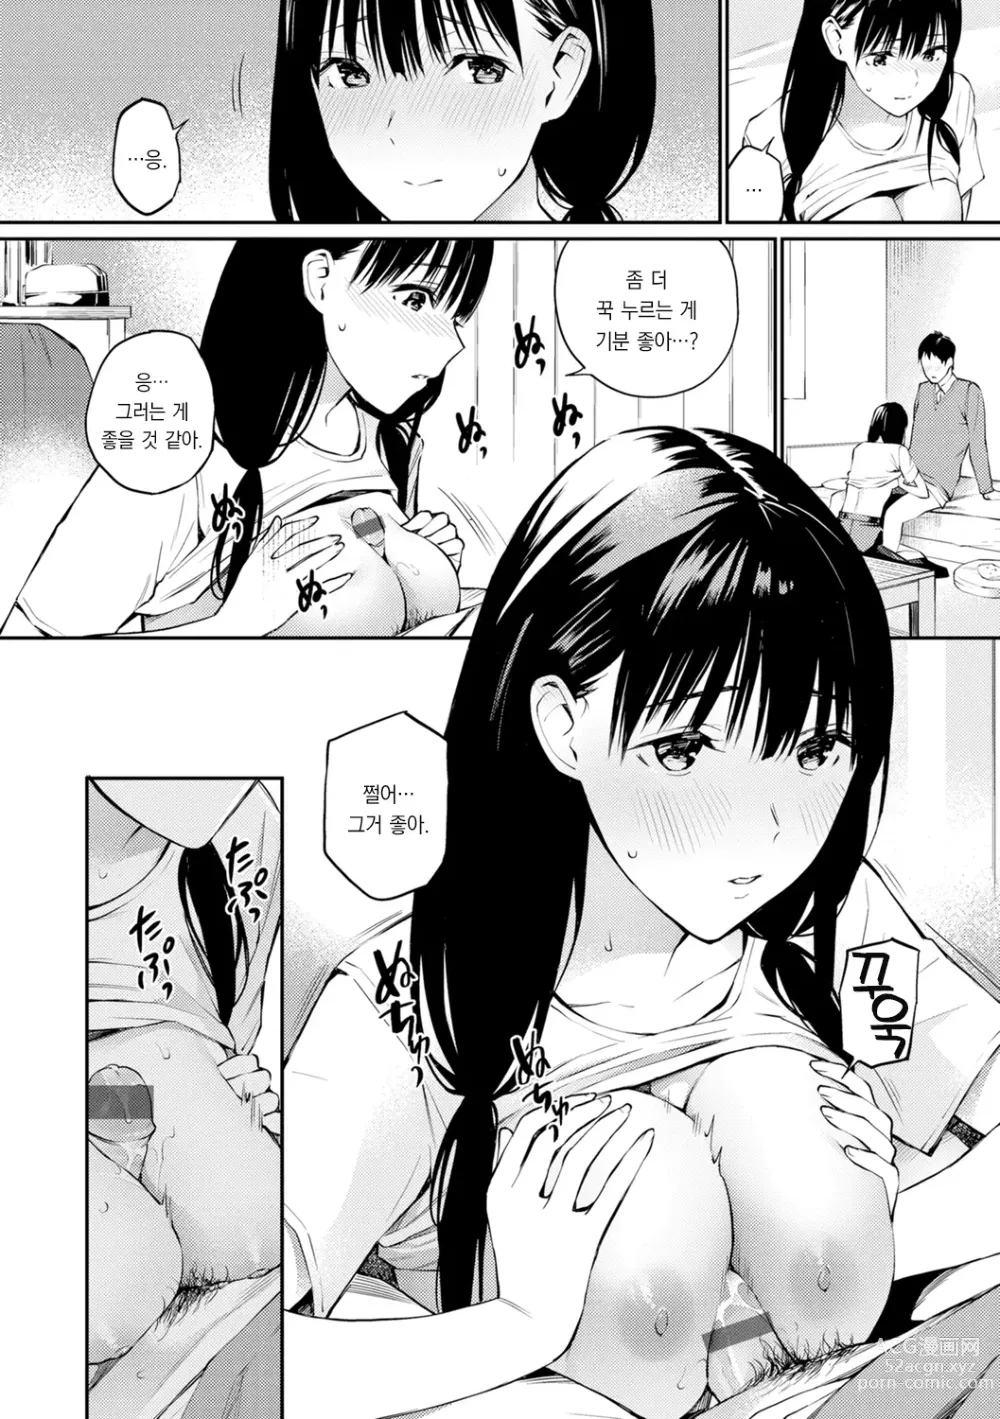 Page 152 of manga 비밀이에요. - Between You&ME